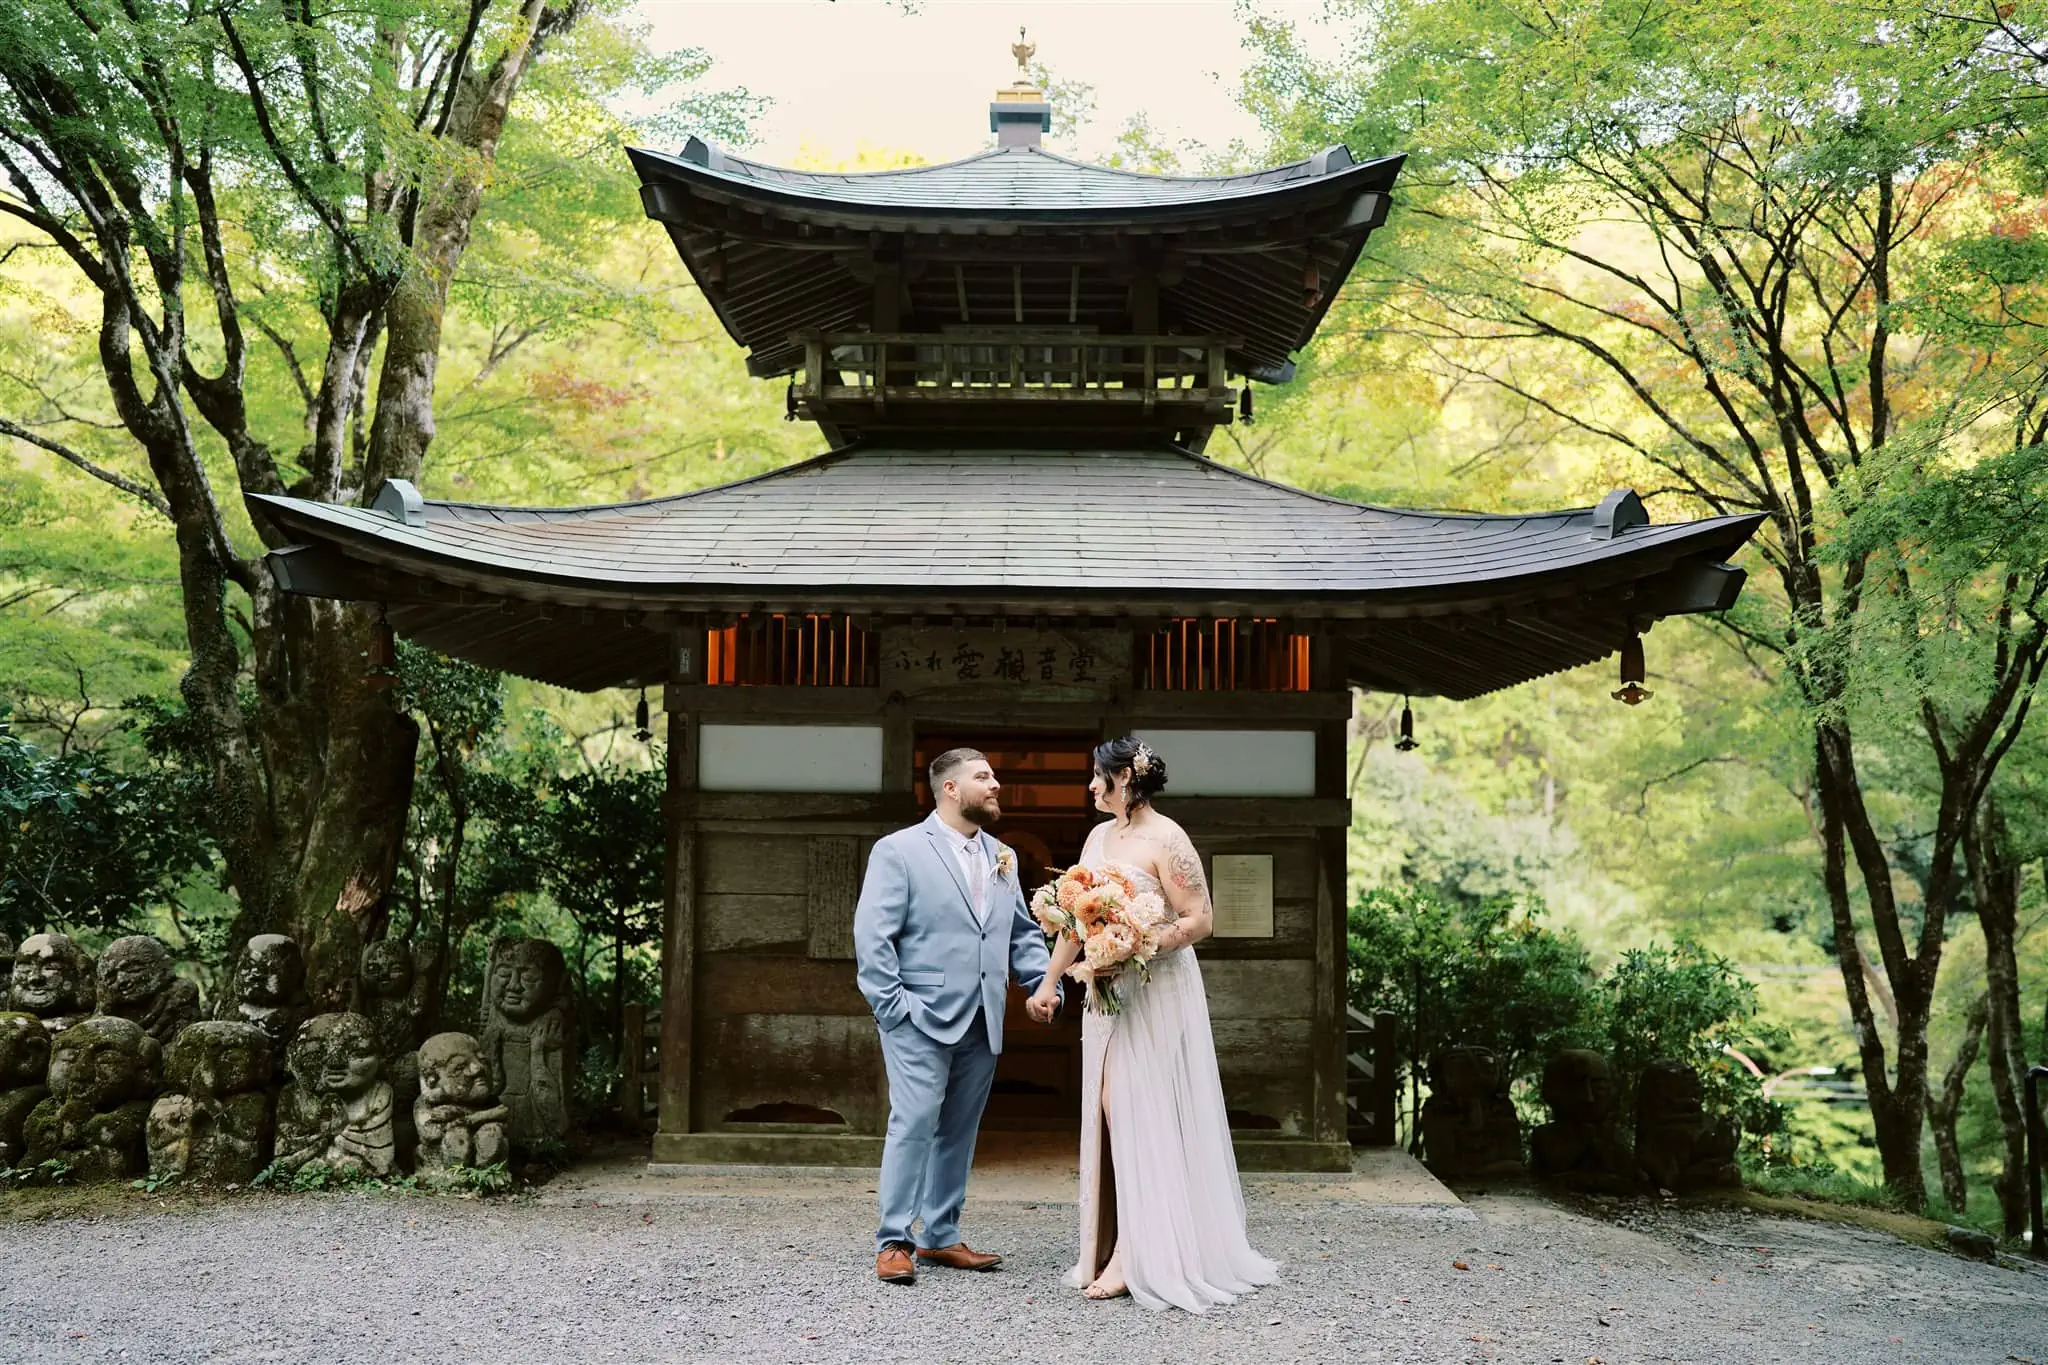 Kyoto Tokyo Japan Elopement Wedding Photographer, Planner & Videographer | A japan elopement couple, beautifully captured by their photographer, standing in front of a pagoda.